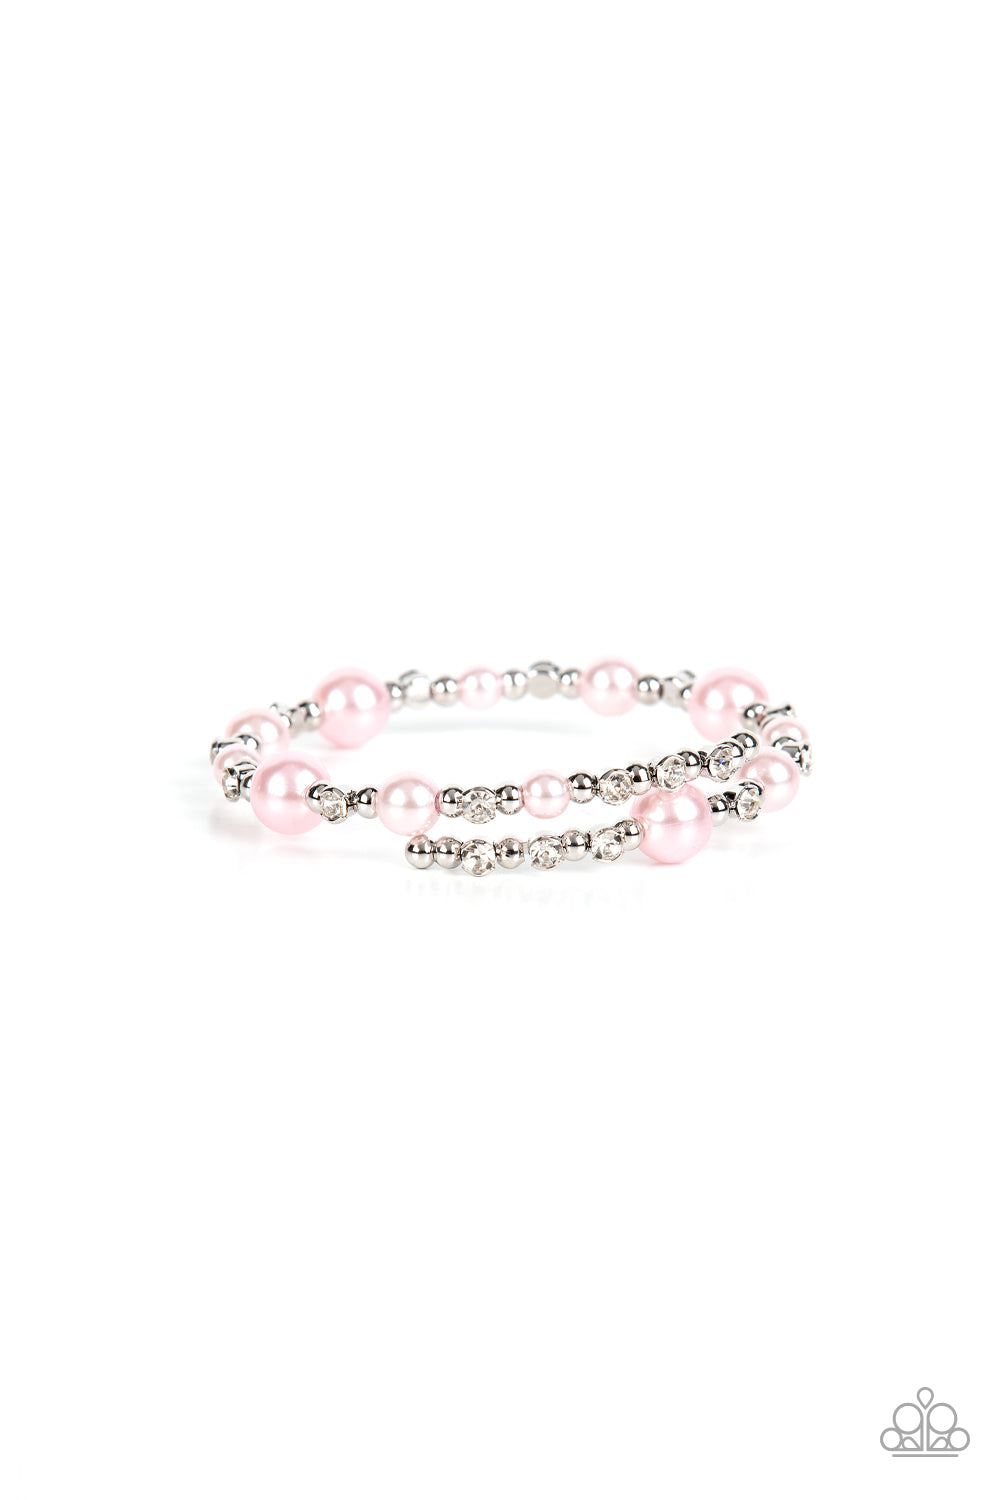 Chicly Celebrity Paparazzi Accessories Bracelet - Pink